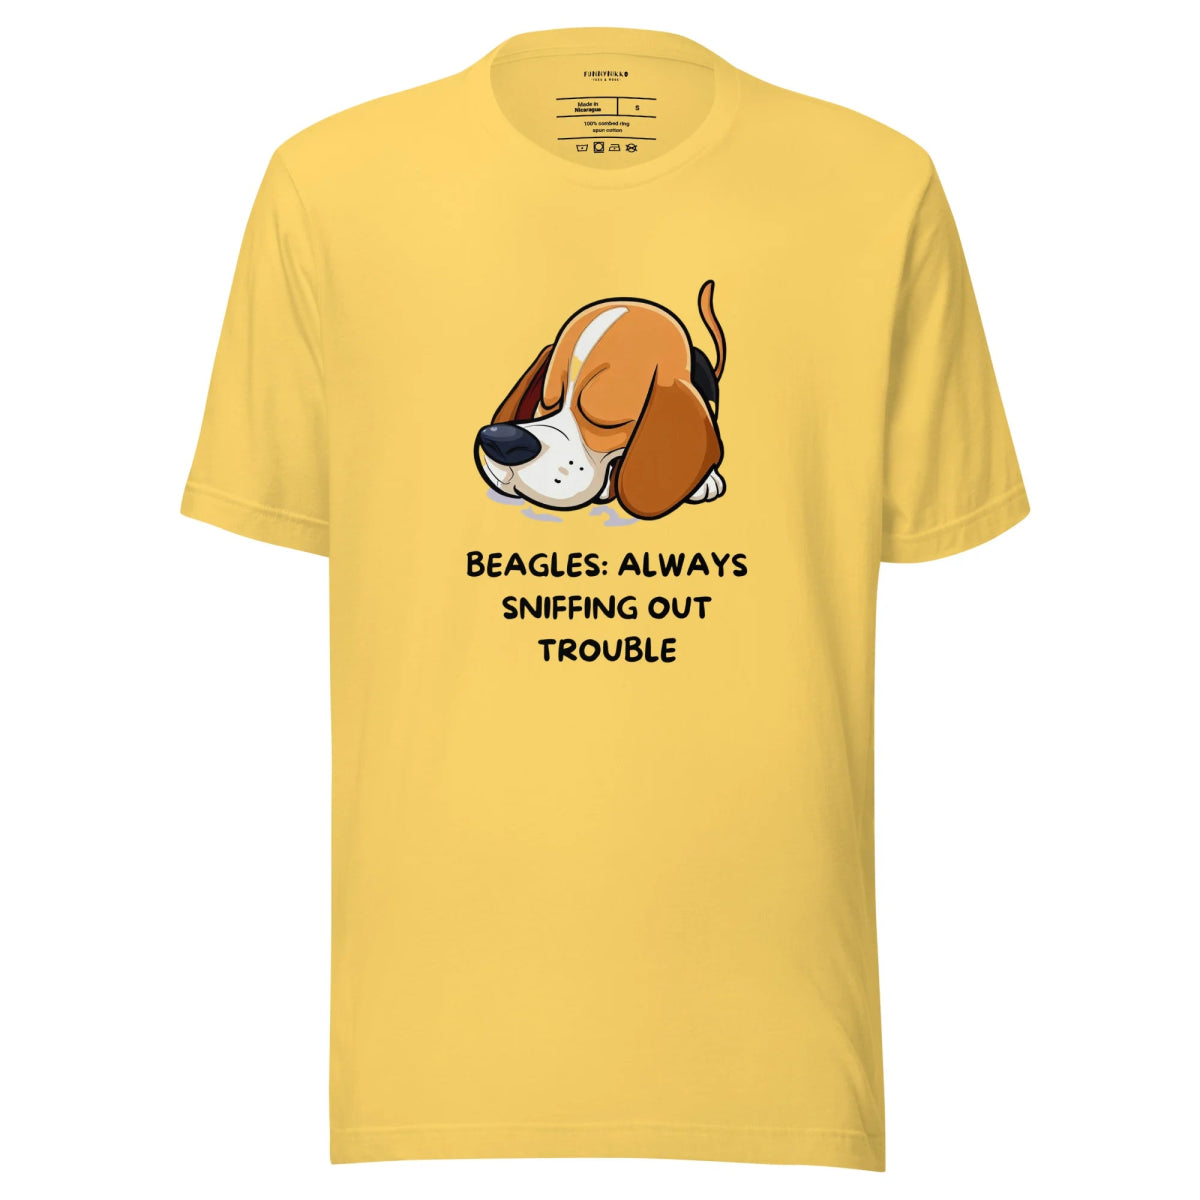 The Trouble-Sniffing Beagle Staple T-Shirt - Funny Nikko